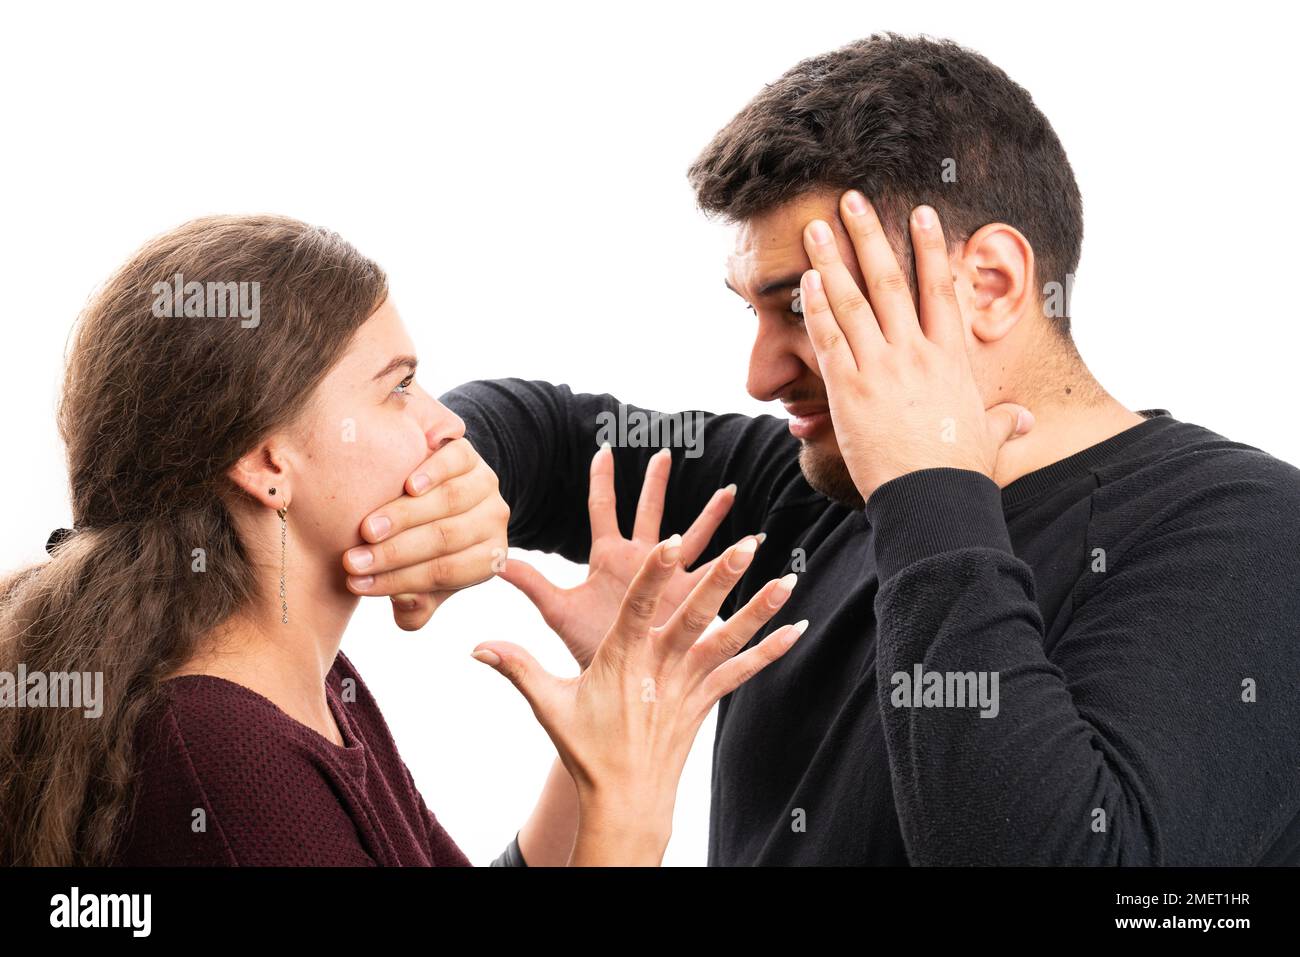 Angry boyfriend covering yelling girlfriend mouth using hand as arguing couple relationship concept isolated on white studio background Stock Photo